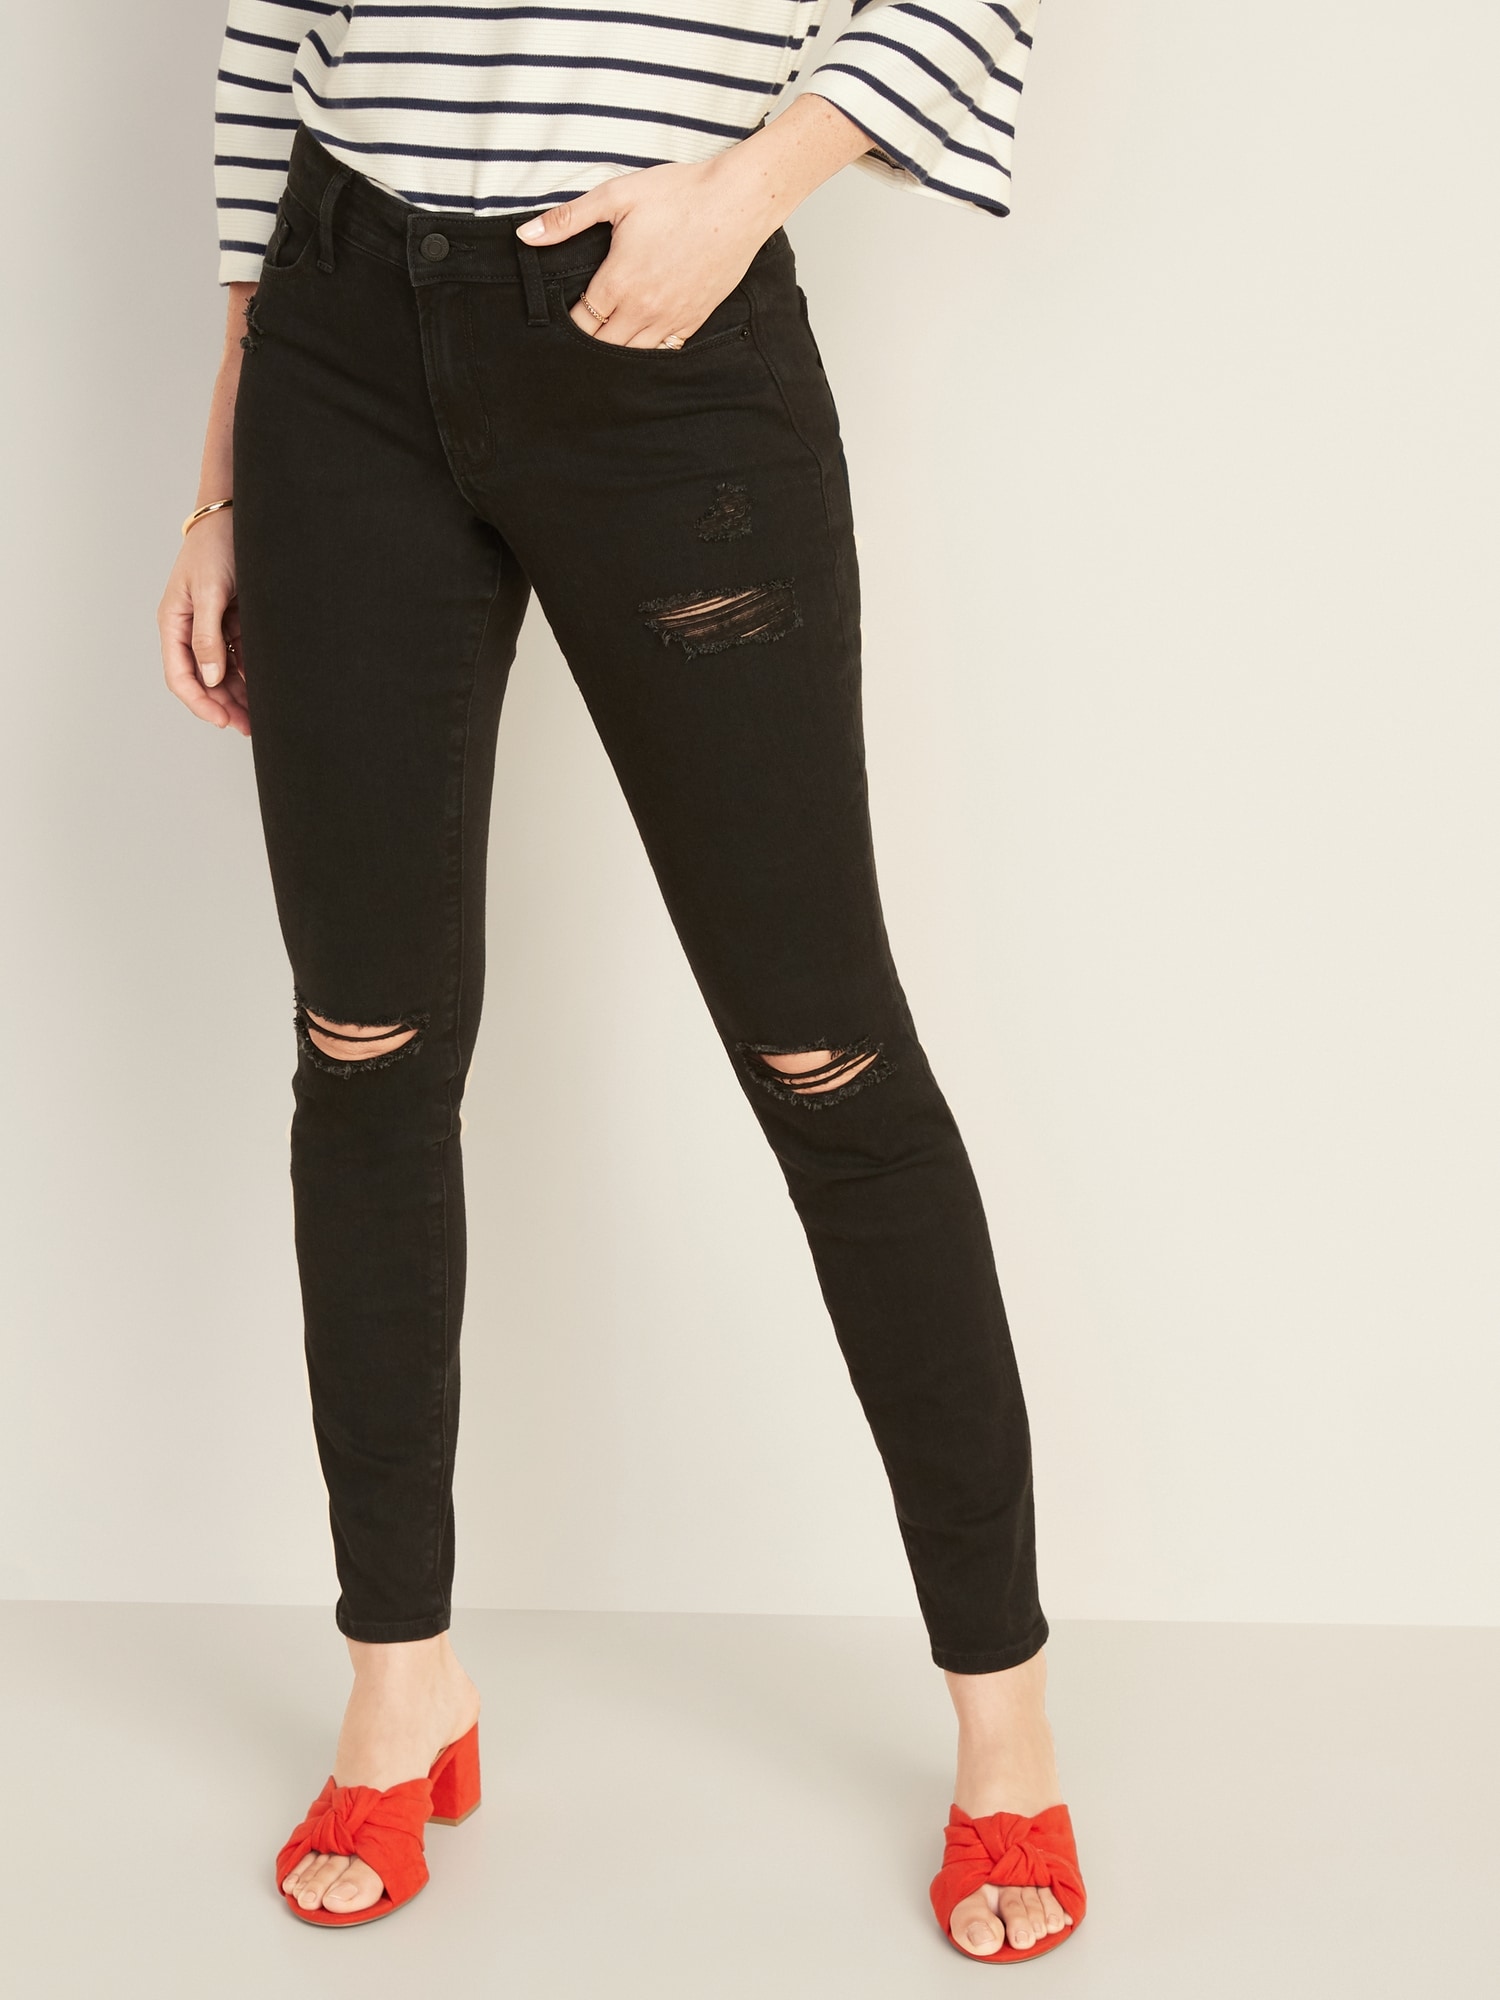 old navy womens curvy jeans